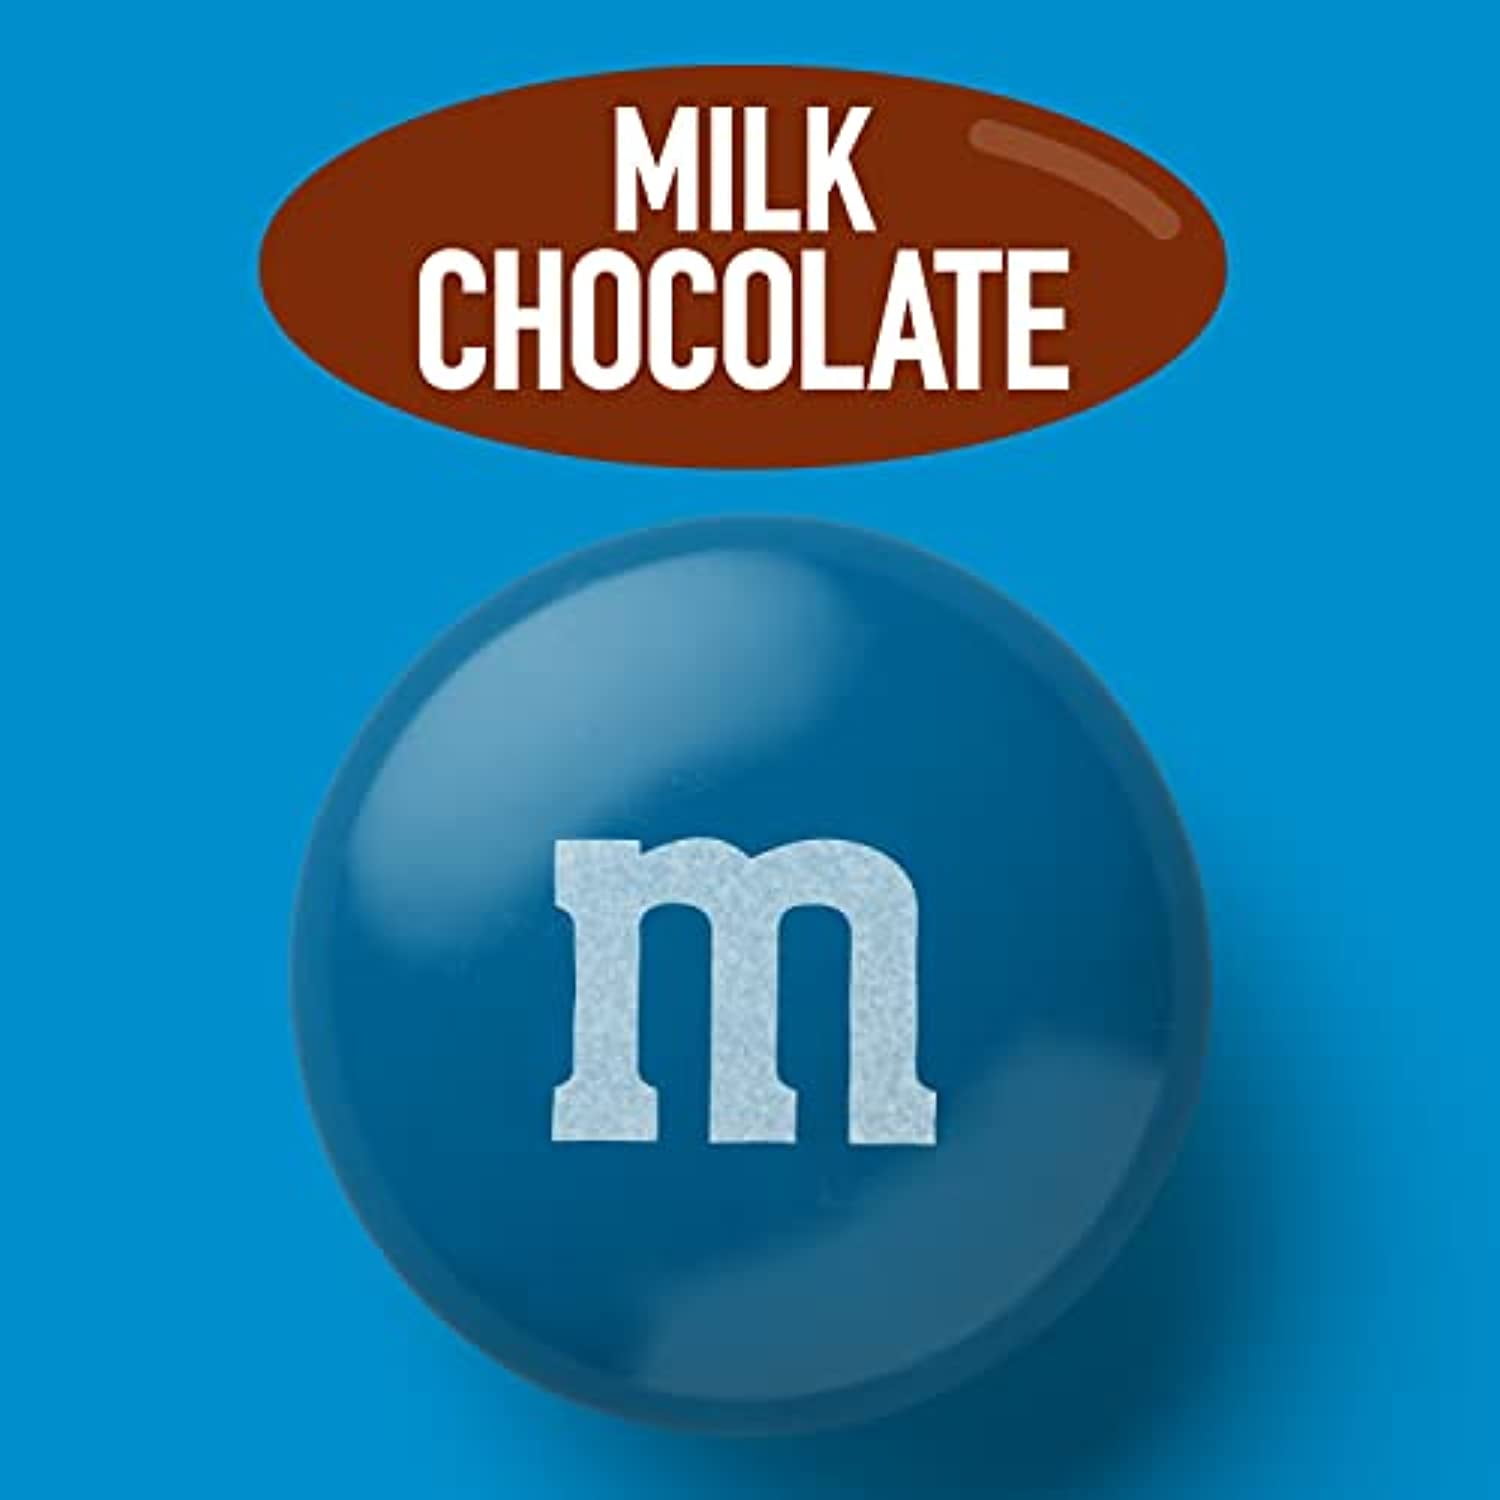 M&Ms Milk Chocolate Dark Pink Candy - 2lb Bulk Candy in Resealable Pack for Candy Buffet, Gender Reveal for Baby Girl, Birthday Parties, Theme Meeting